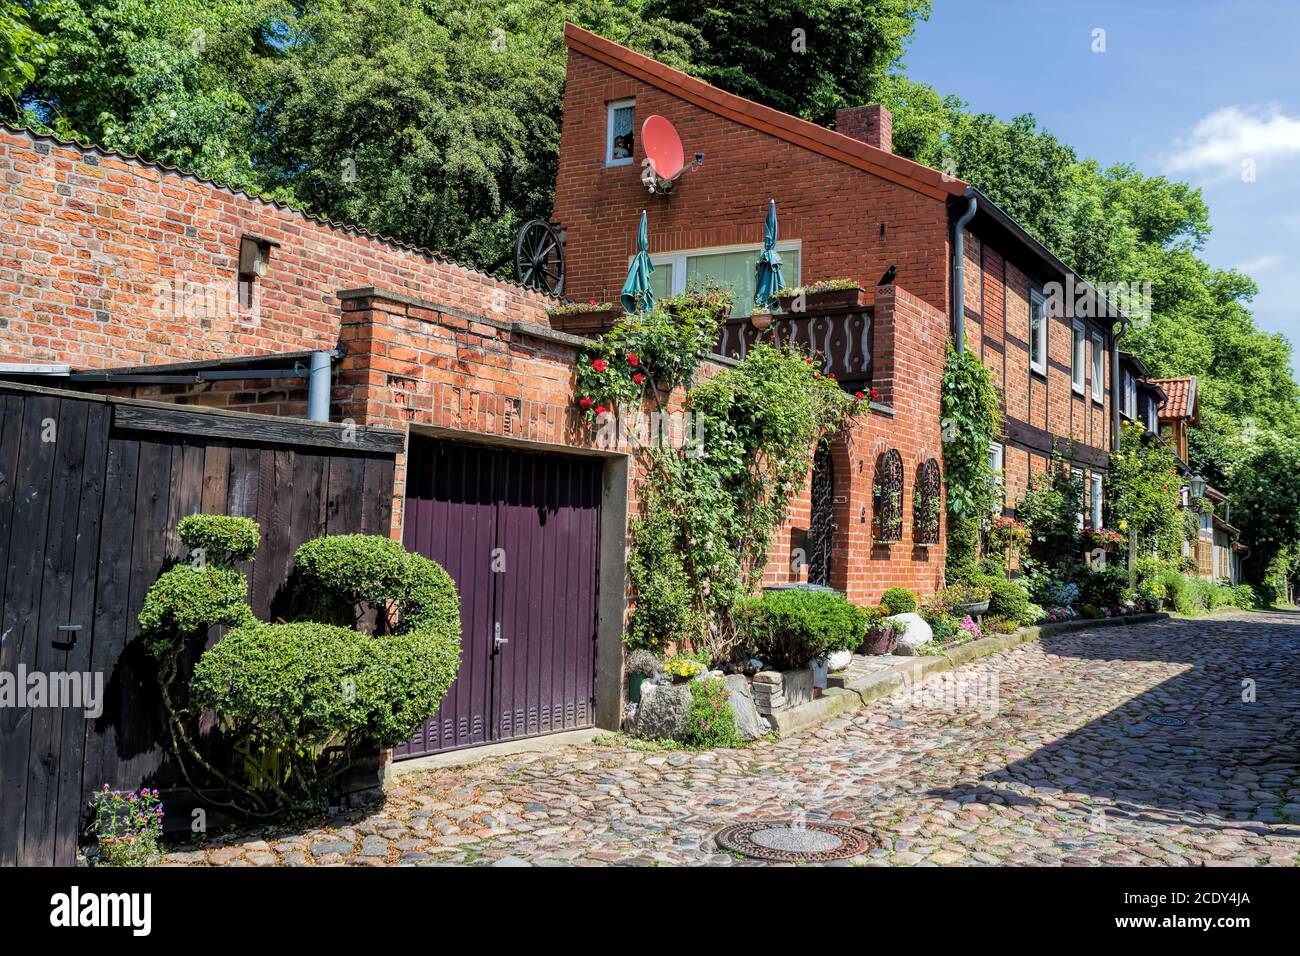 Old town of Lueneburg in Germany Stock Photo